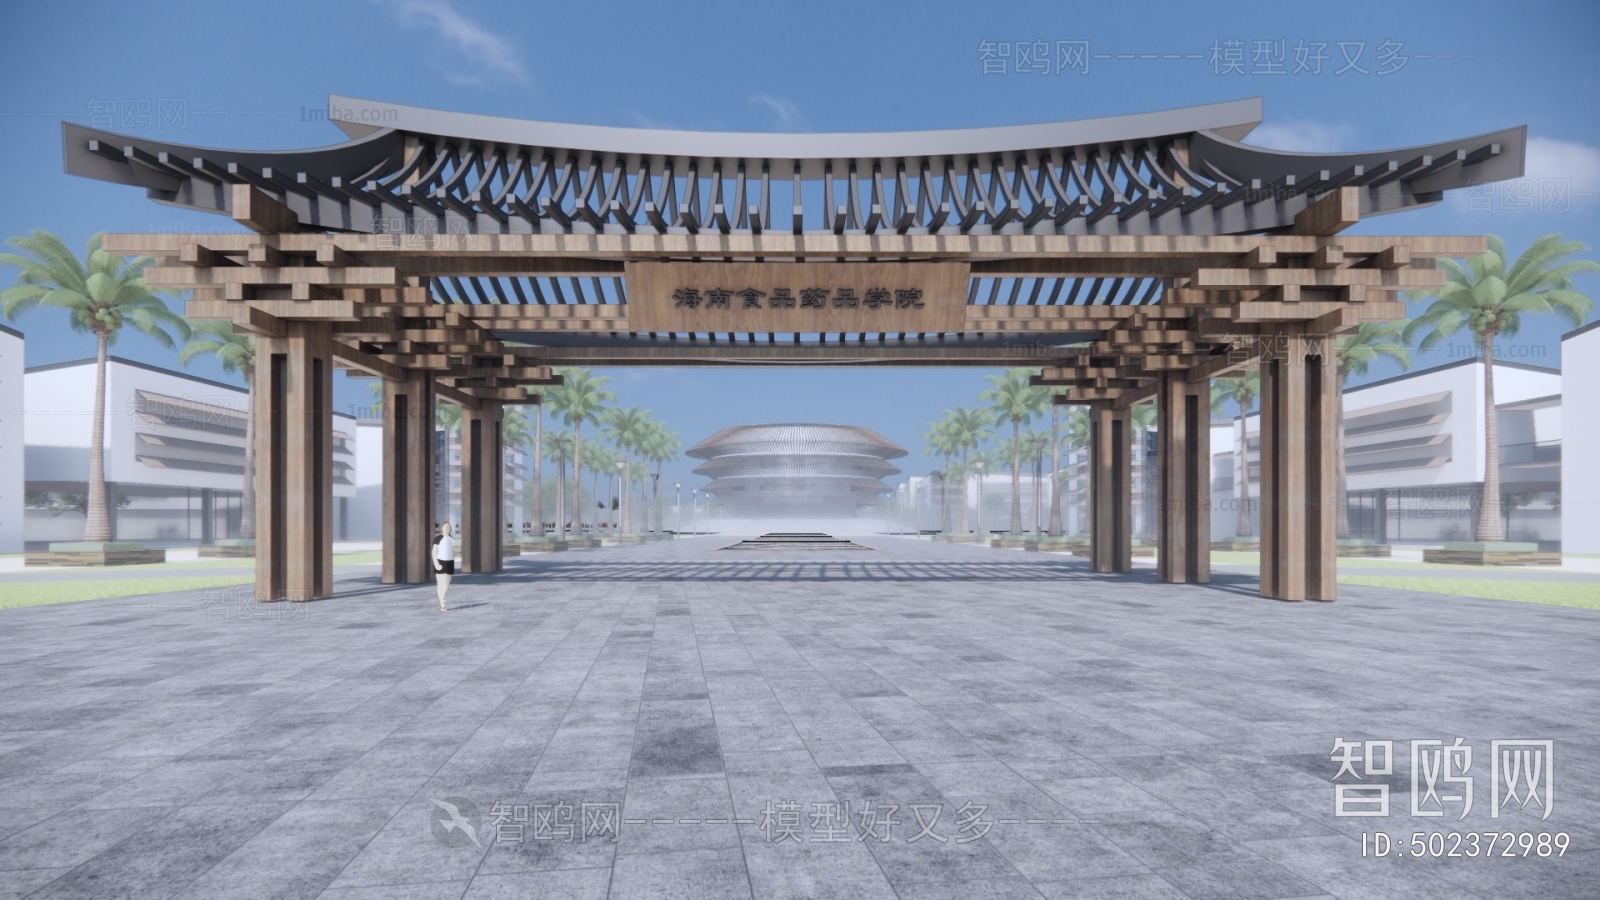 New Chinese Style Decorated Archway